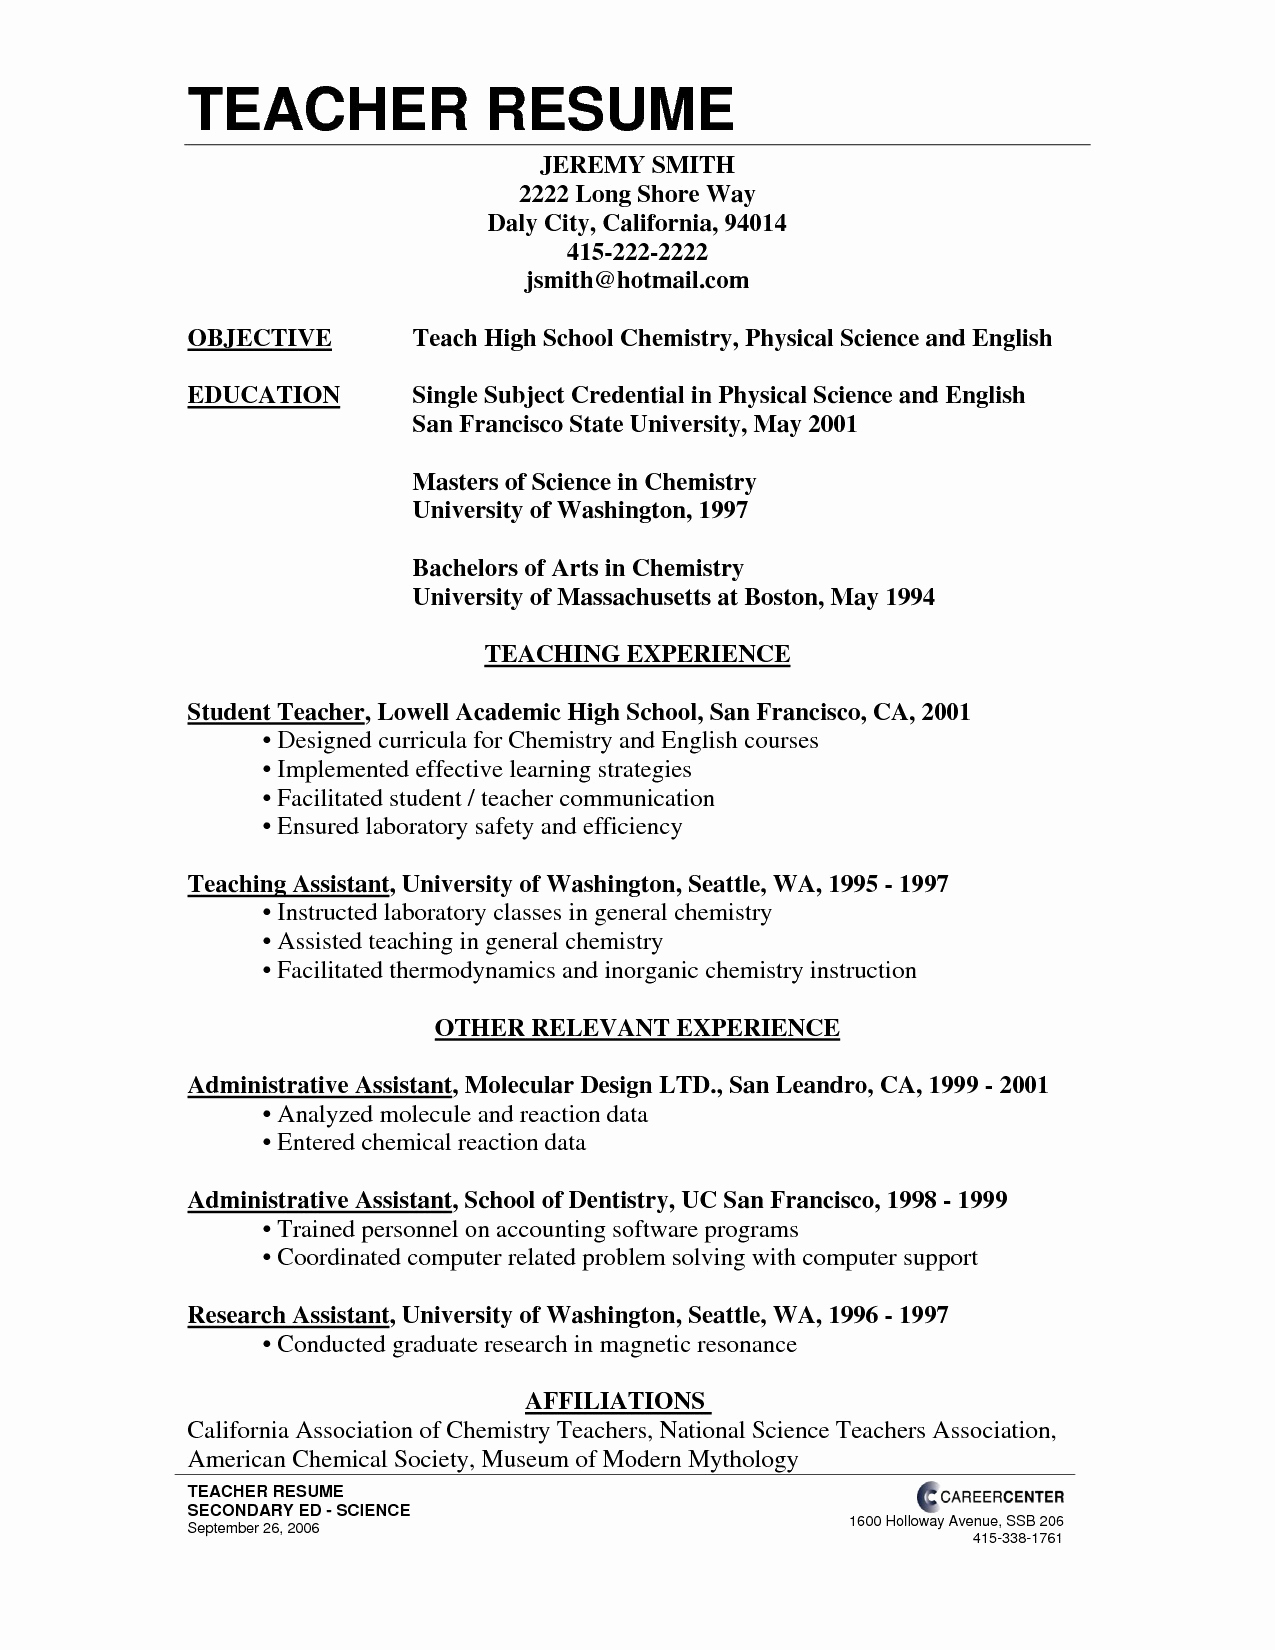 Resume Cover Letter Template Word Free - Resume Templates Word Free New Free Cover Letter Templates Examples